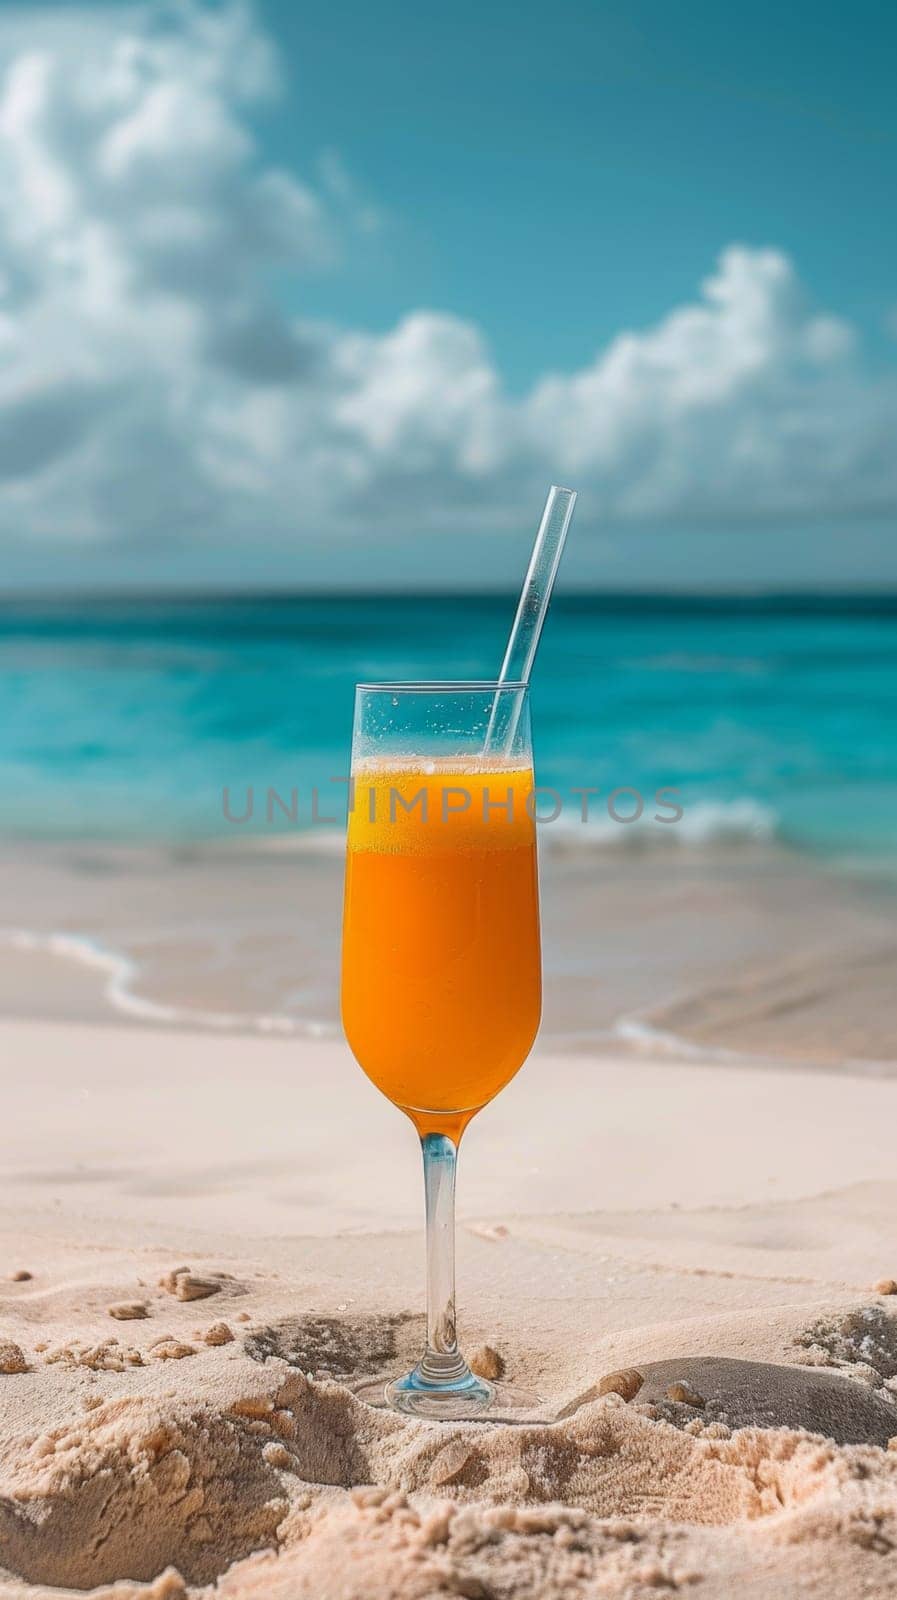 A glass of a drink sitting on the beach with sand